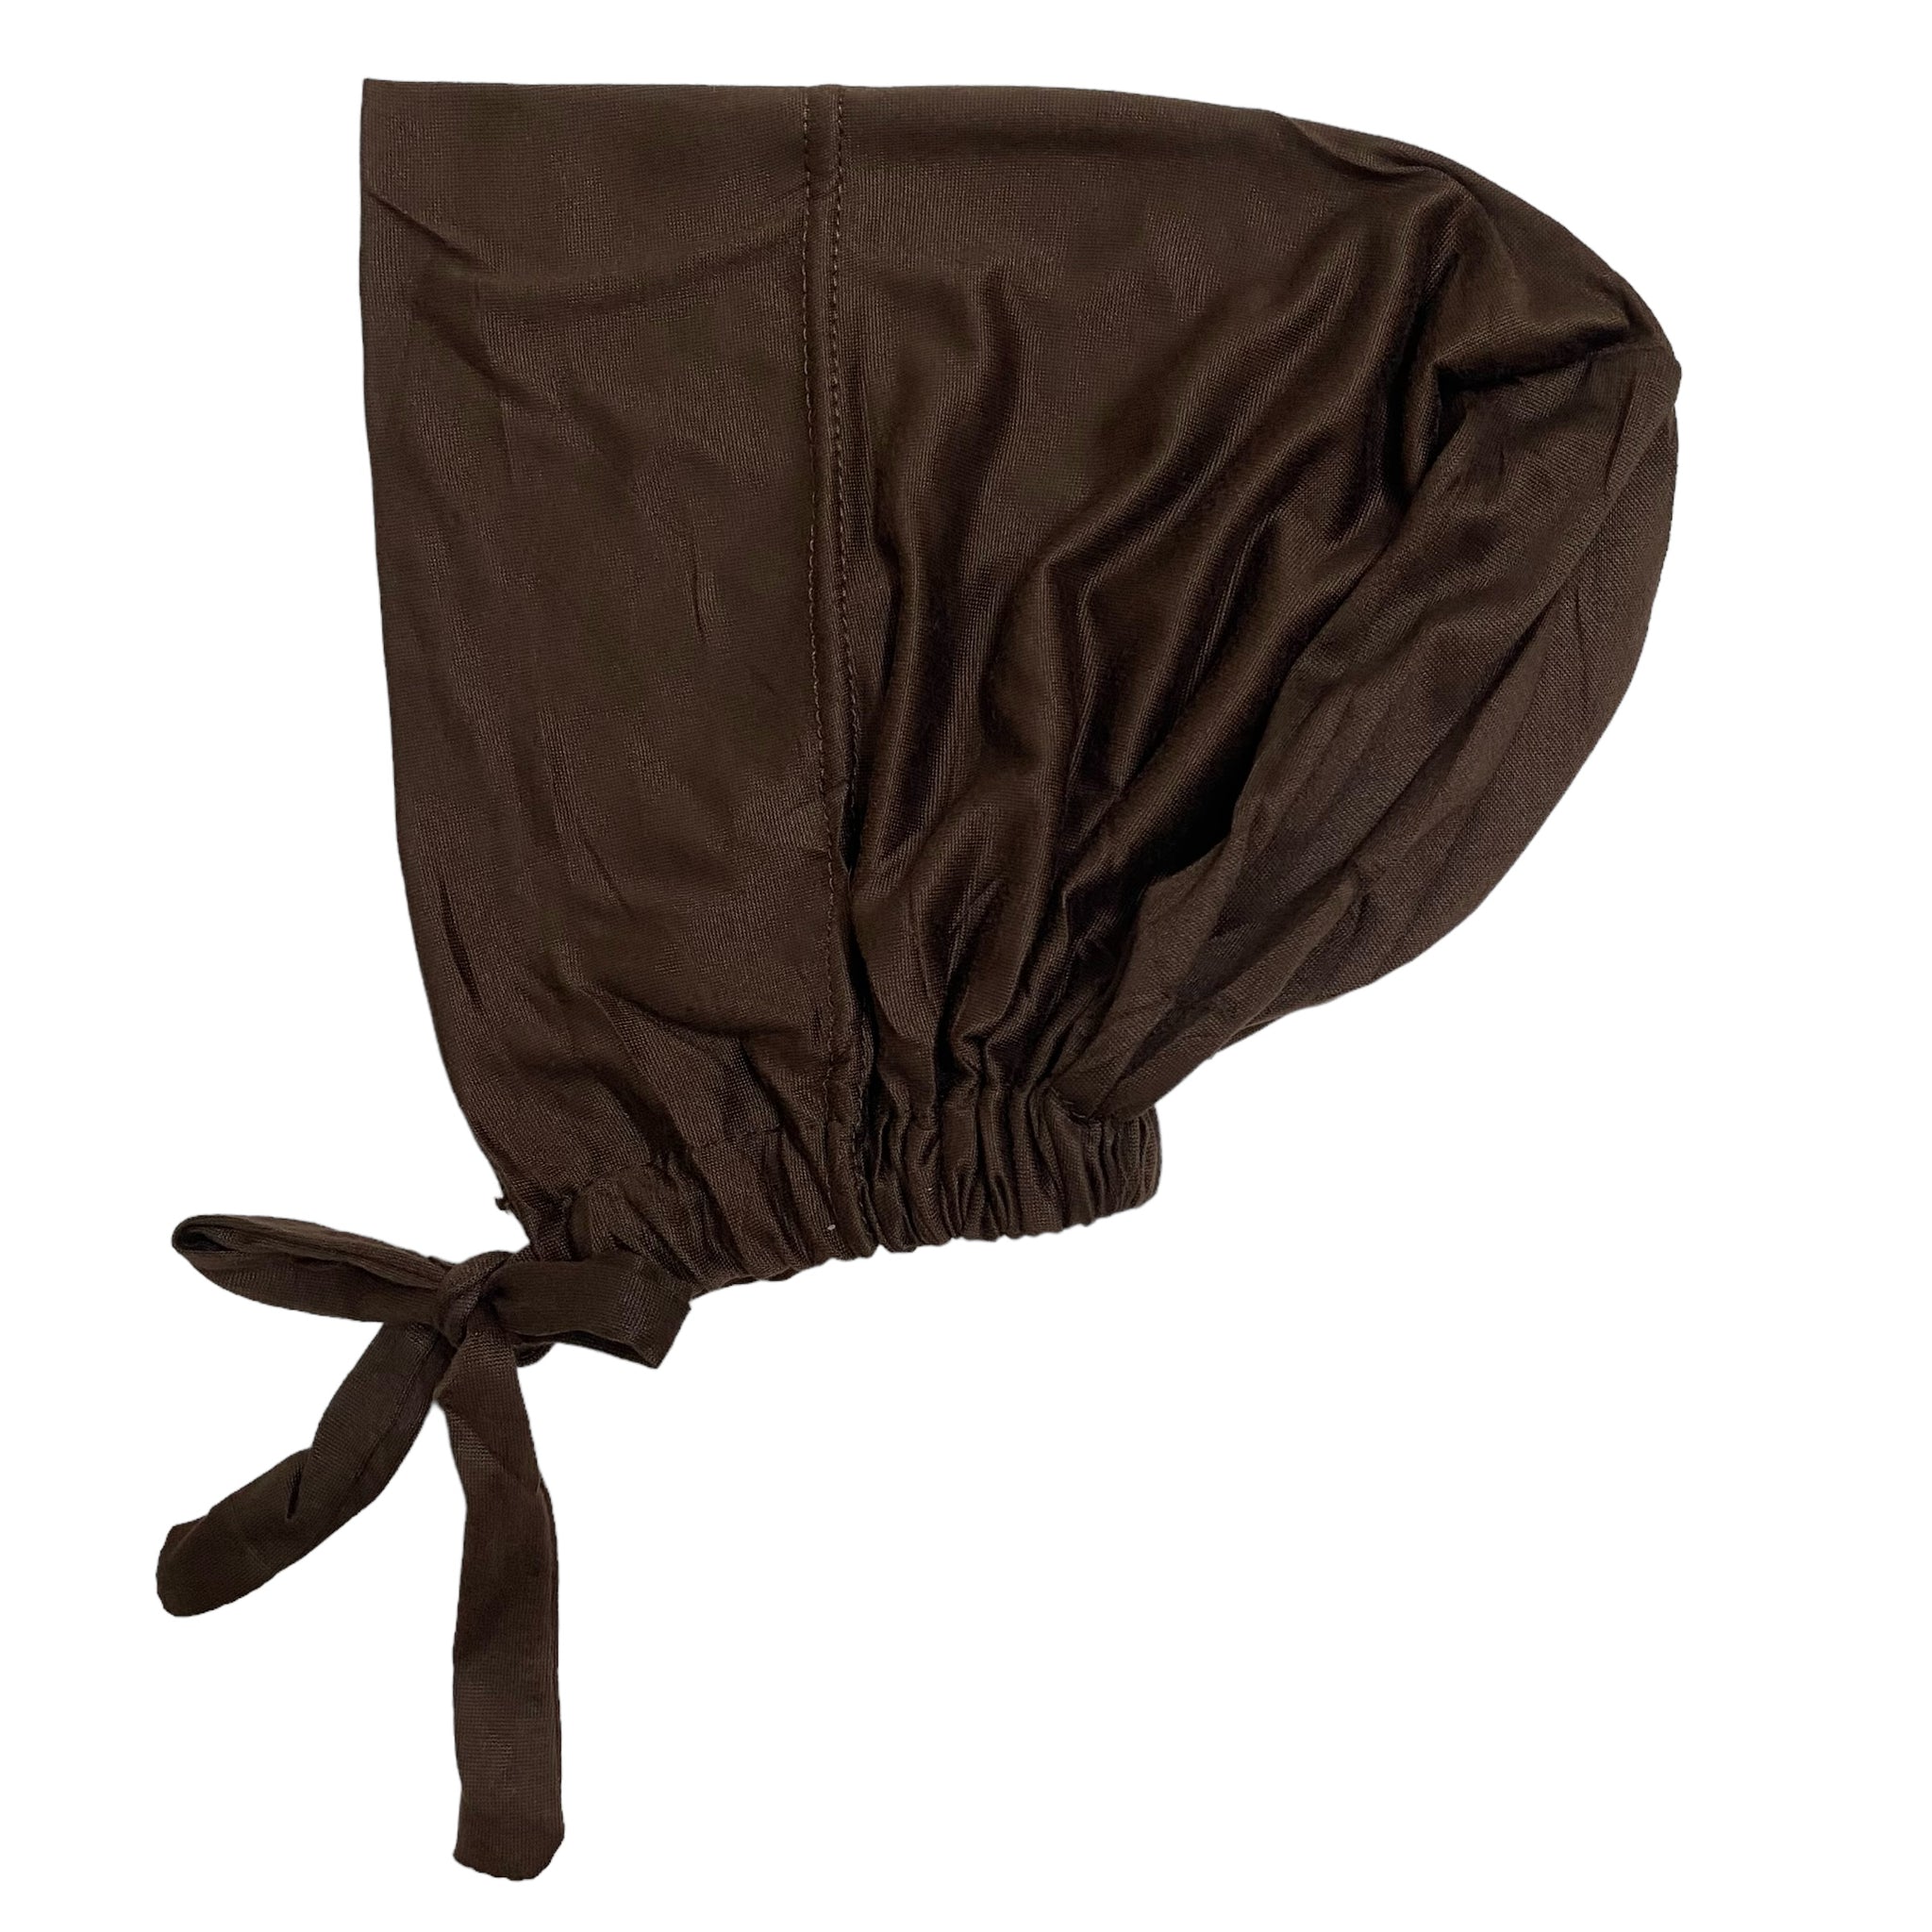 Imported Tie back Full Covered Hijab Cap – Chocolate